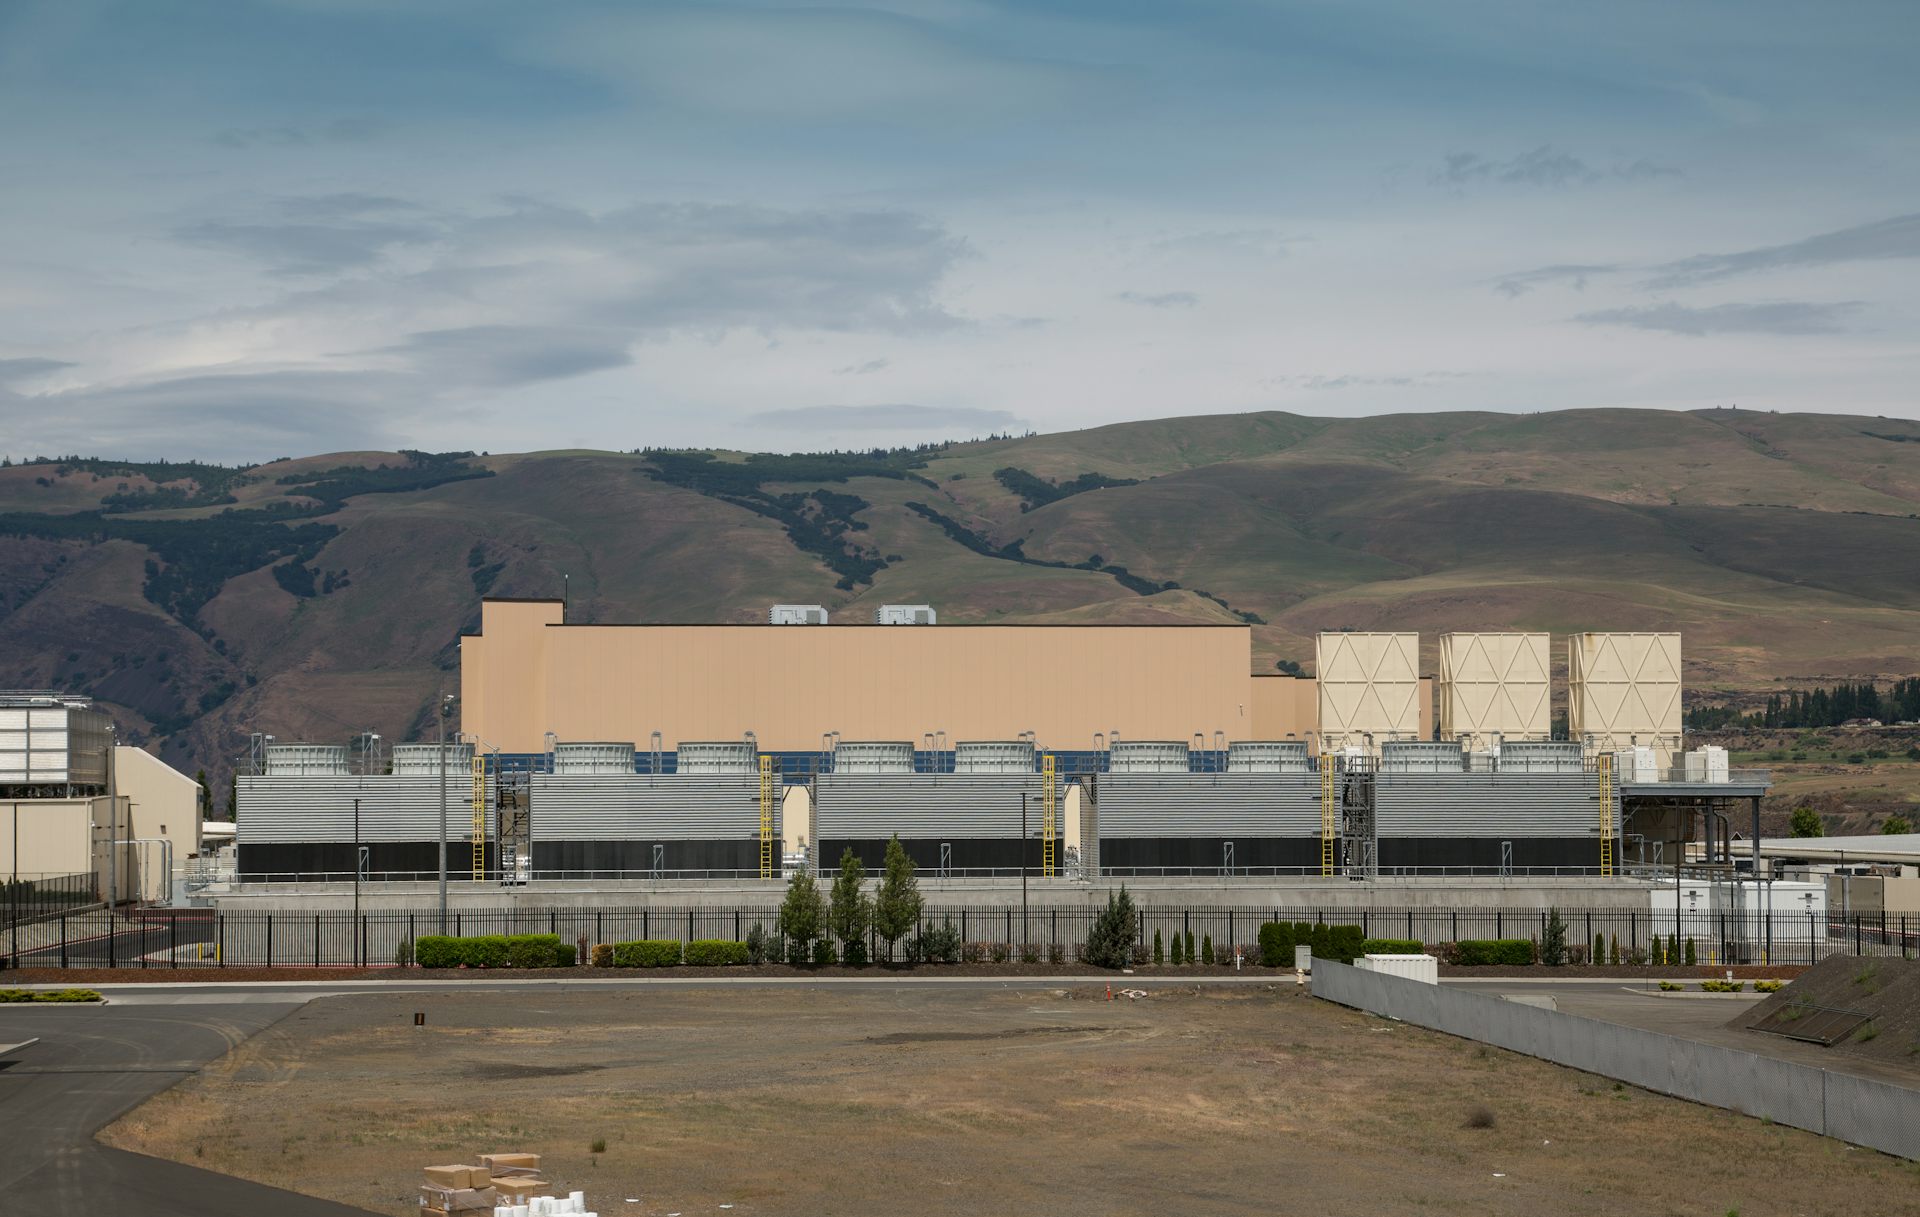  AI chatbots and image generators run on thousands of computers housed in data centers like this Google facility in Oregon.